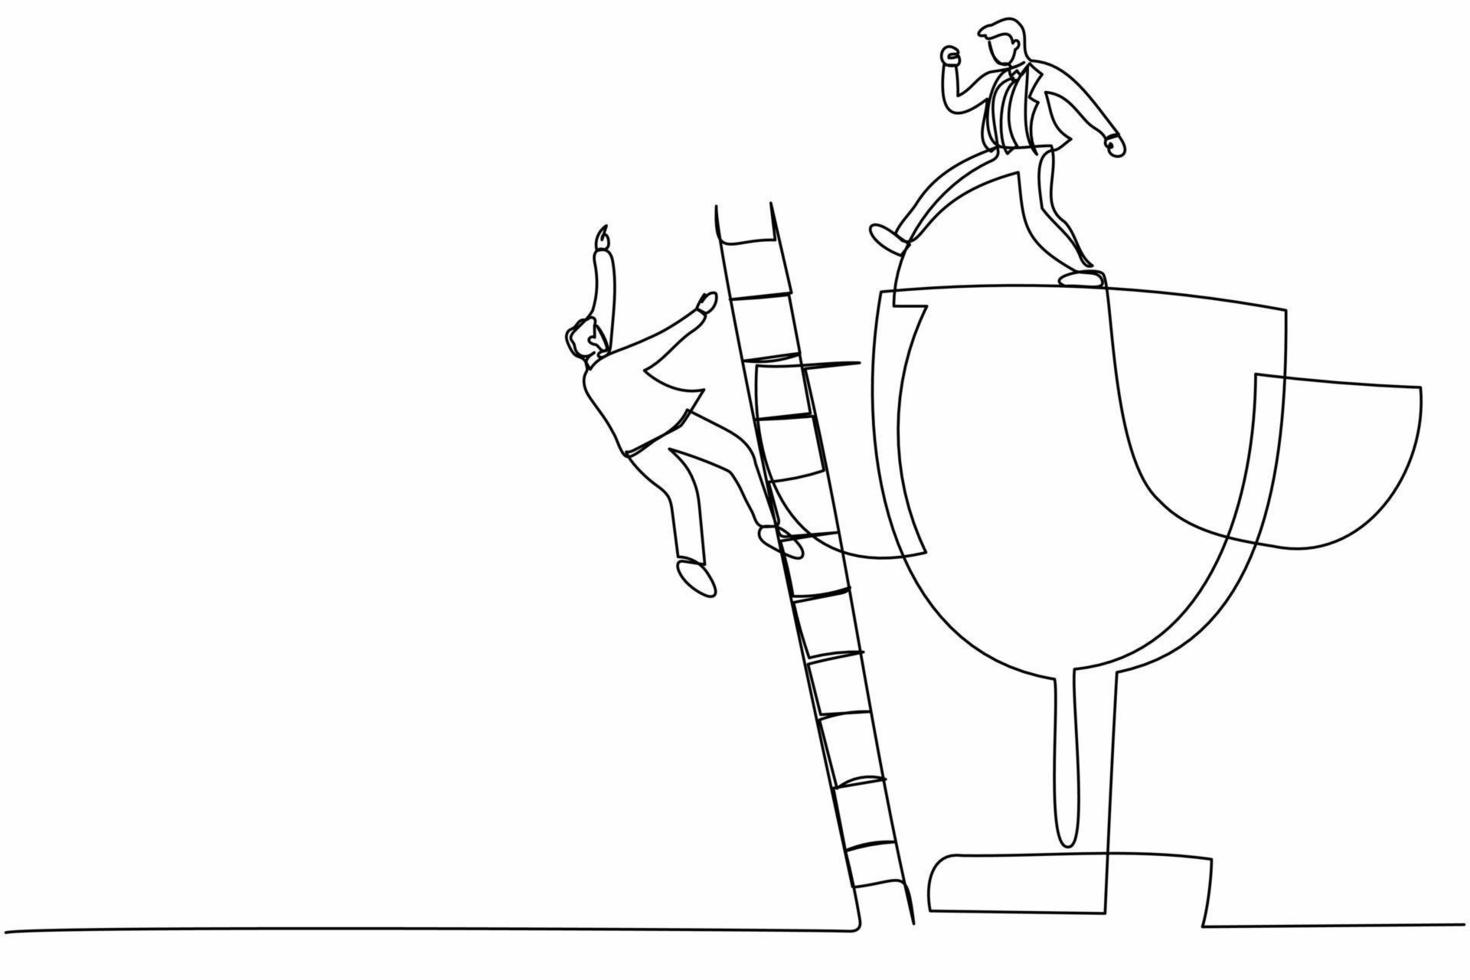 Single continuous line drawing active businessman kicking to make his rival falling down from the top ladder trophy of success. Minimalism metaphor. One line draw graphic design vector illustration